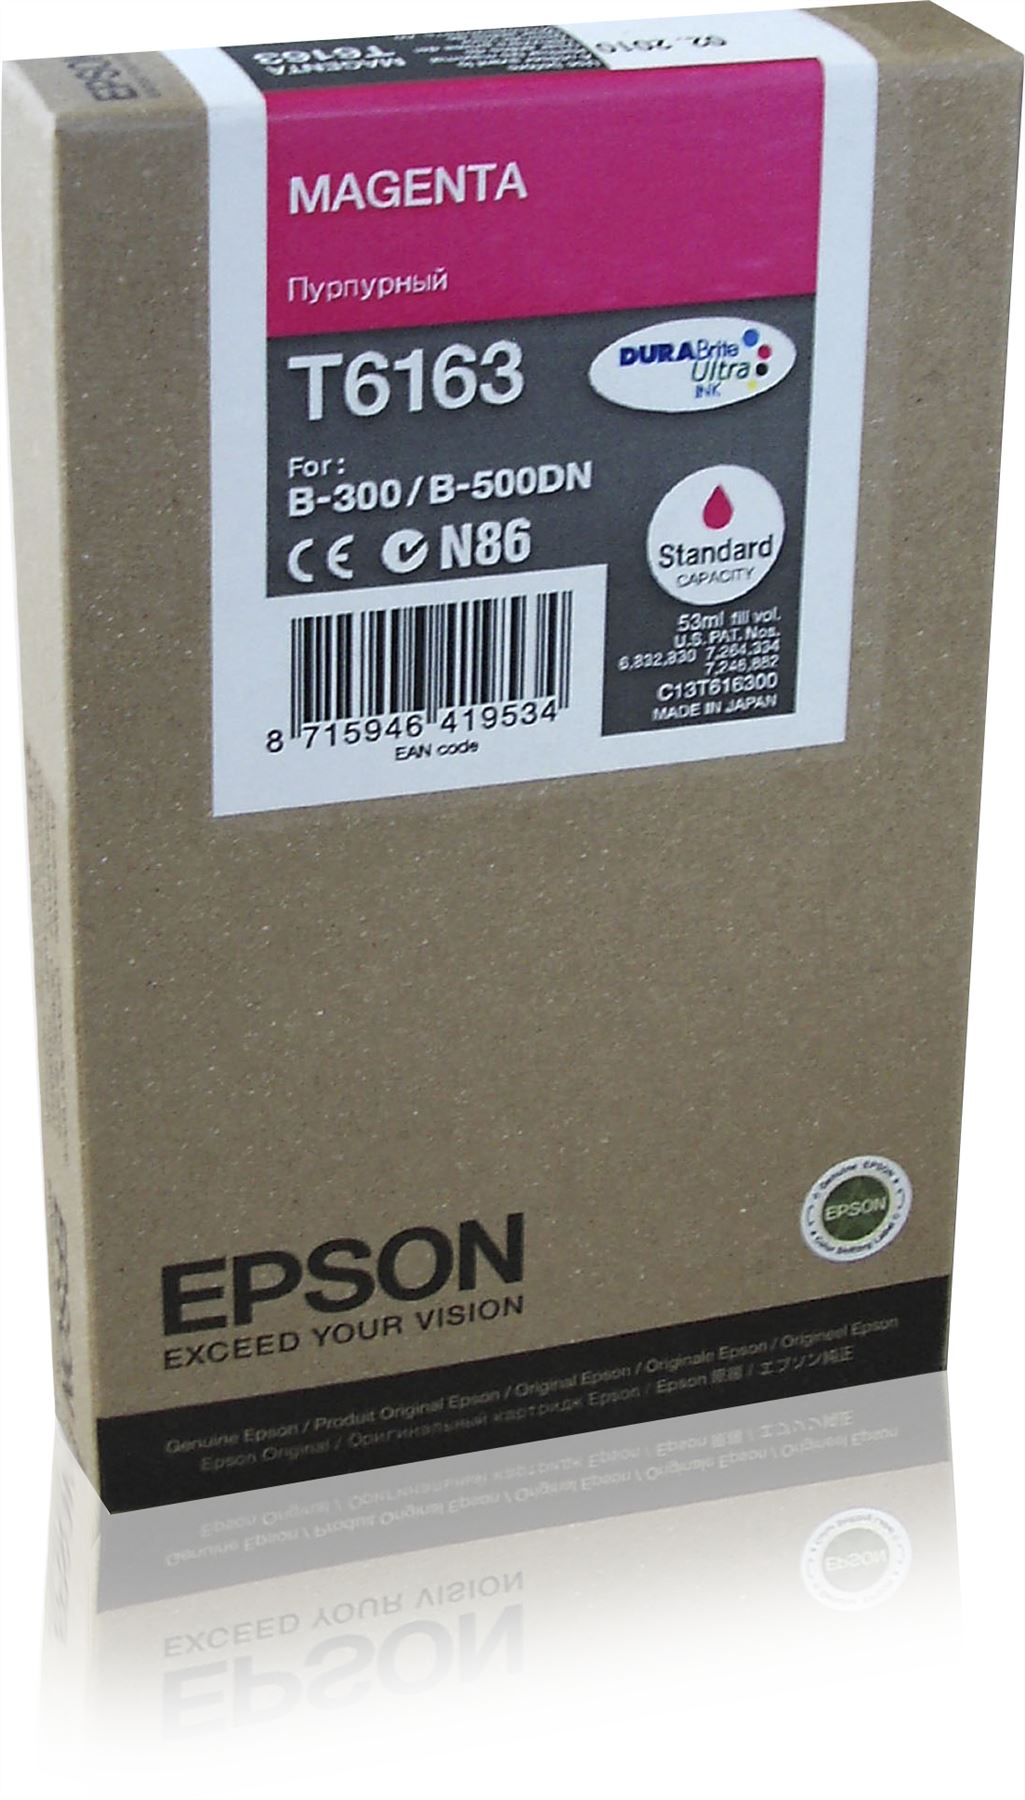 Epson C13T616300/T6163 Ink cartridge magenta, 3.5K pages 53ml for Epson B 300/500